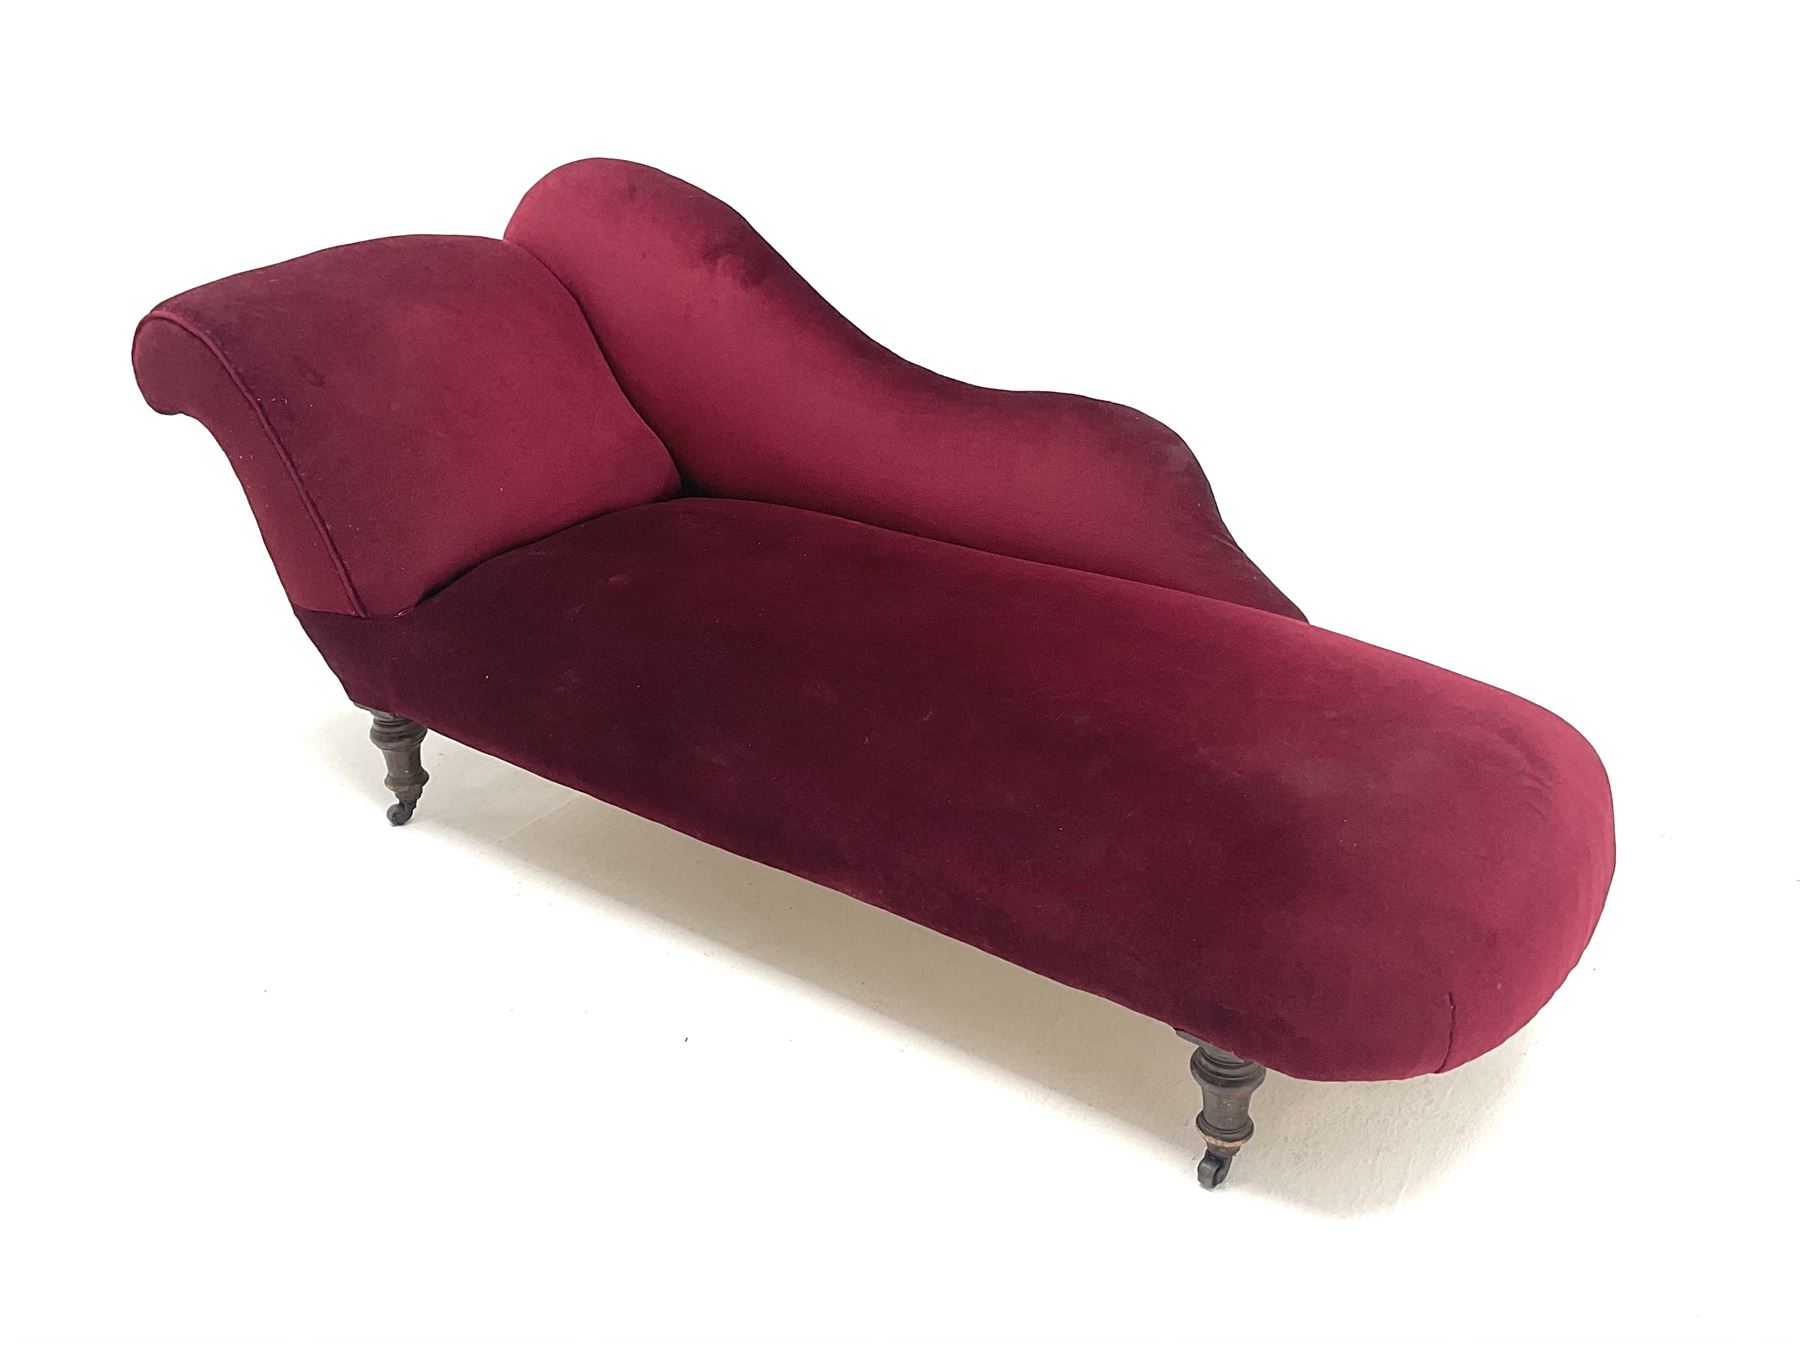 Early 20th century chaise longue - Image 2 of 2